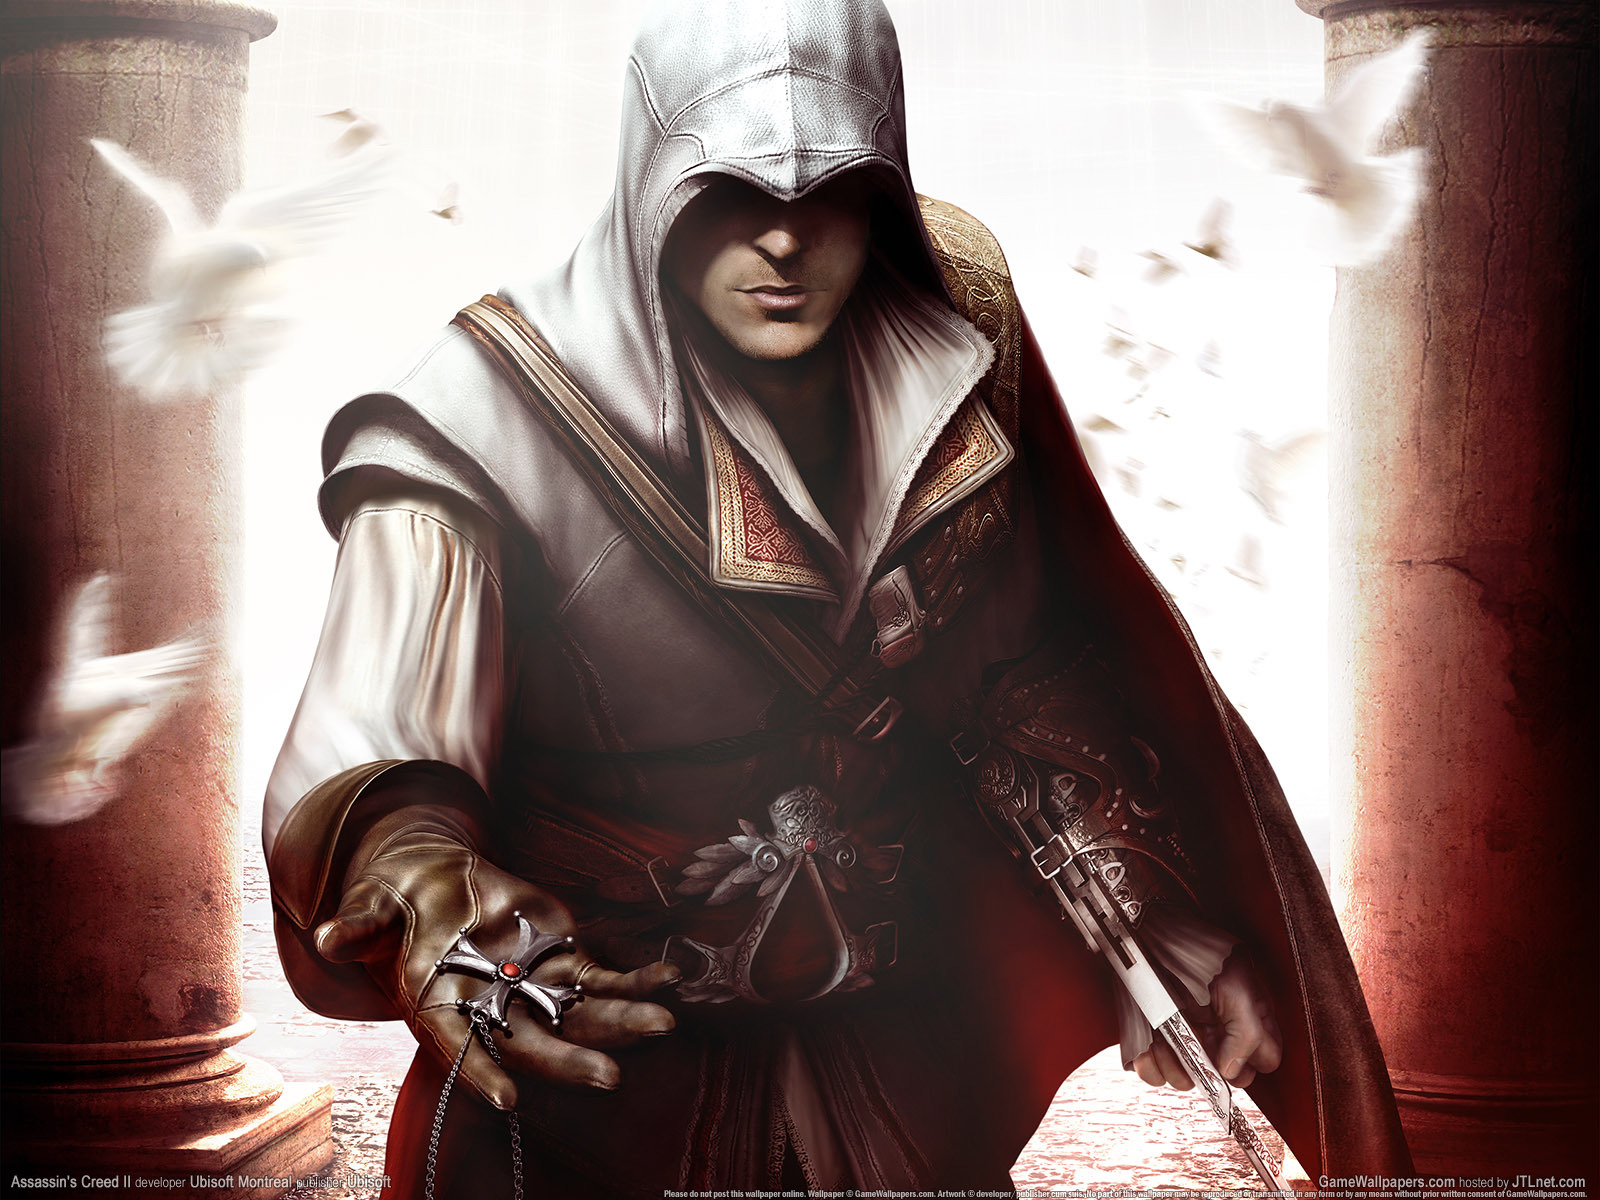 Cool Wallpapers assassin's creed, games, men